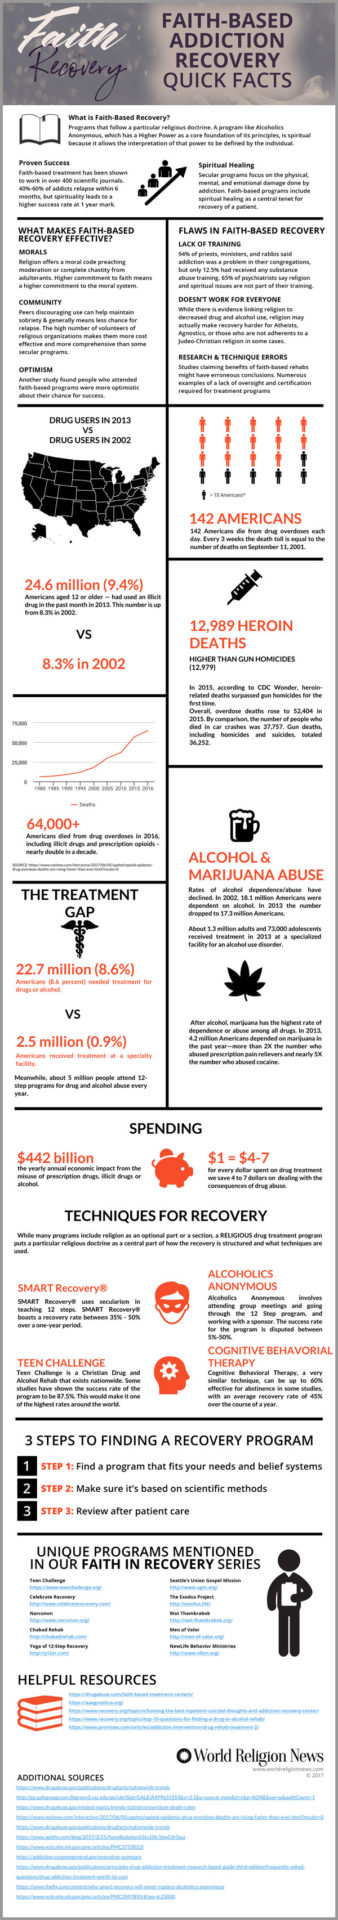 Faith-Based Addiction Recovery Quick Facts Infographic